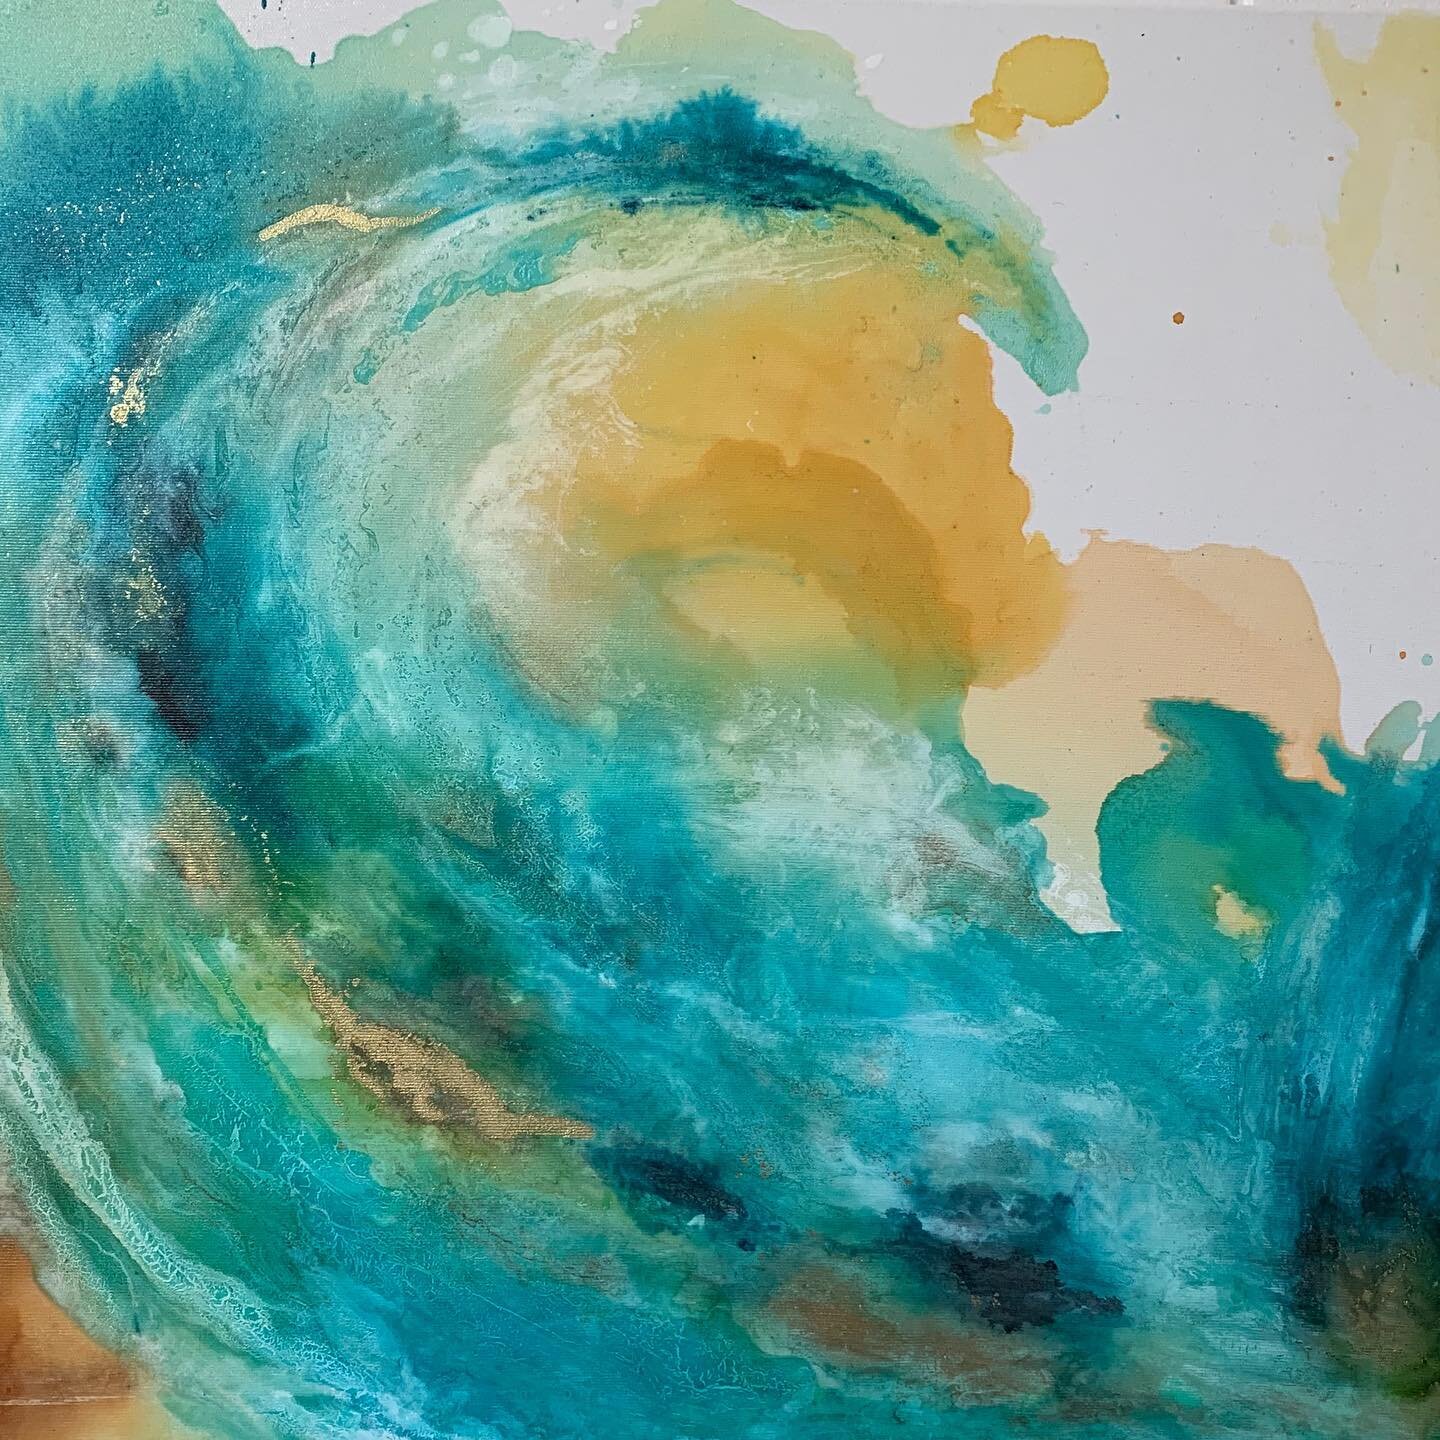 Not on purpose, but this one turned into a beautiful sunrise wave. ☀️ 🌊 It reminds me of Coogee Beach and all the big surf we&rsquo;ve been having lately. 
 
Mixed media on canvas, A1.
#beachart #coogeebeach #coogee #coogeeartist #gowiththeflow #flo